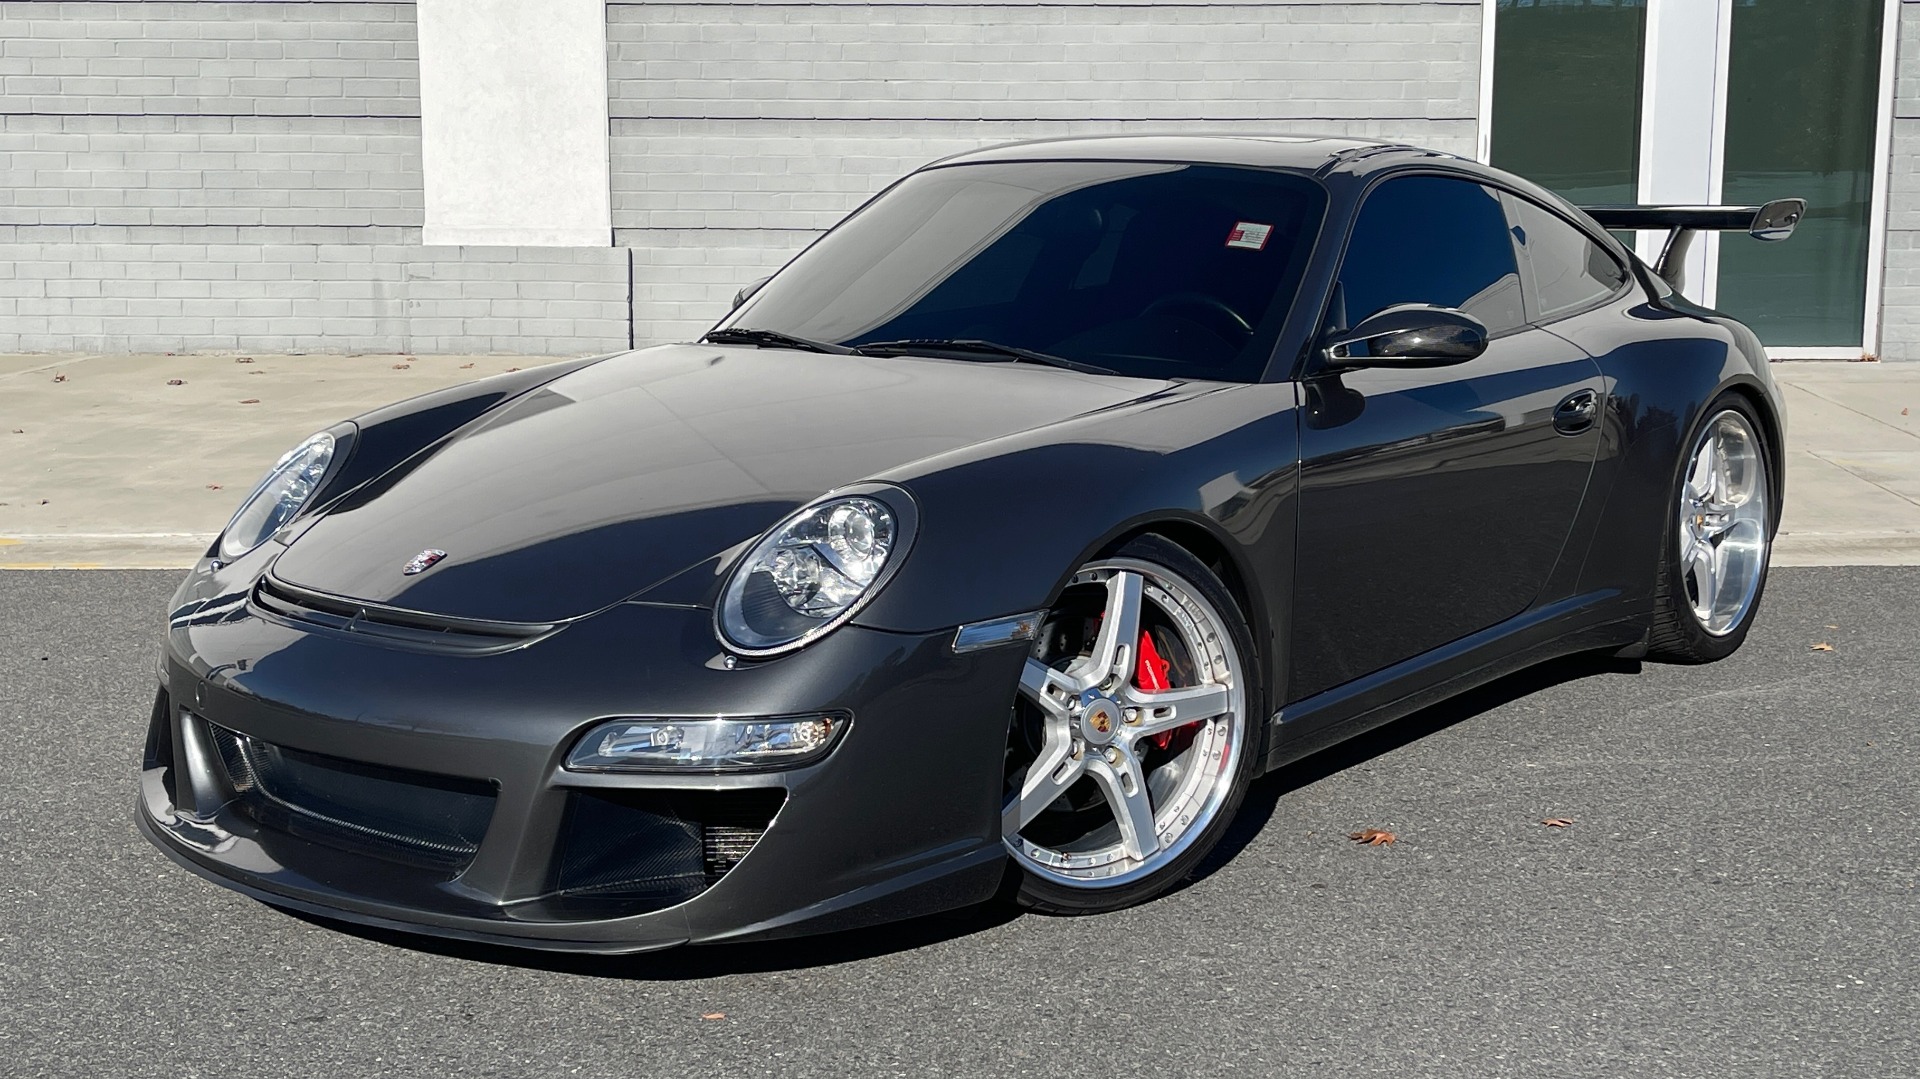 Used 2007 Porsche 911 CARRERA 4S / 3.8L H6 / 6-SPD MANUAL / HTD STS / SPORT CHRONO / BODY KIT for sale Sold at Formula Imports in Charlotte NC 28227 3